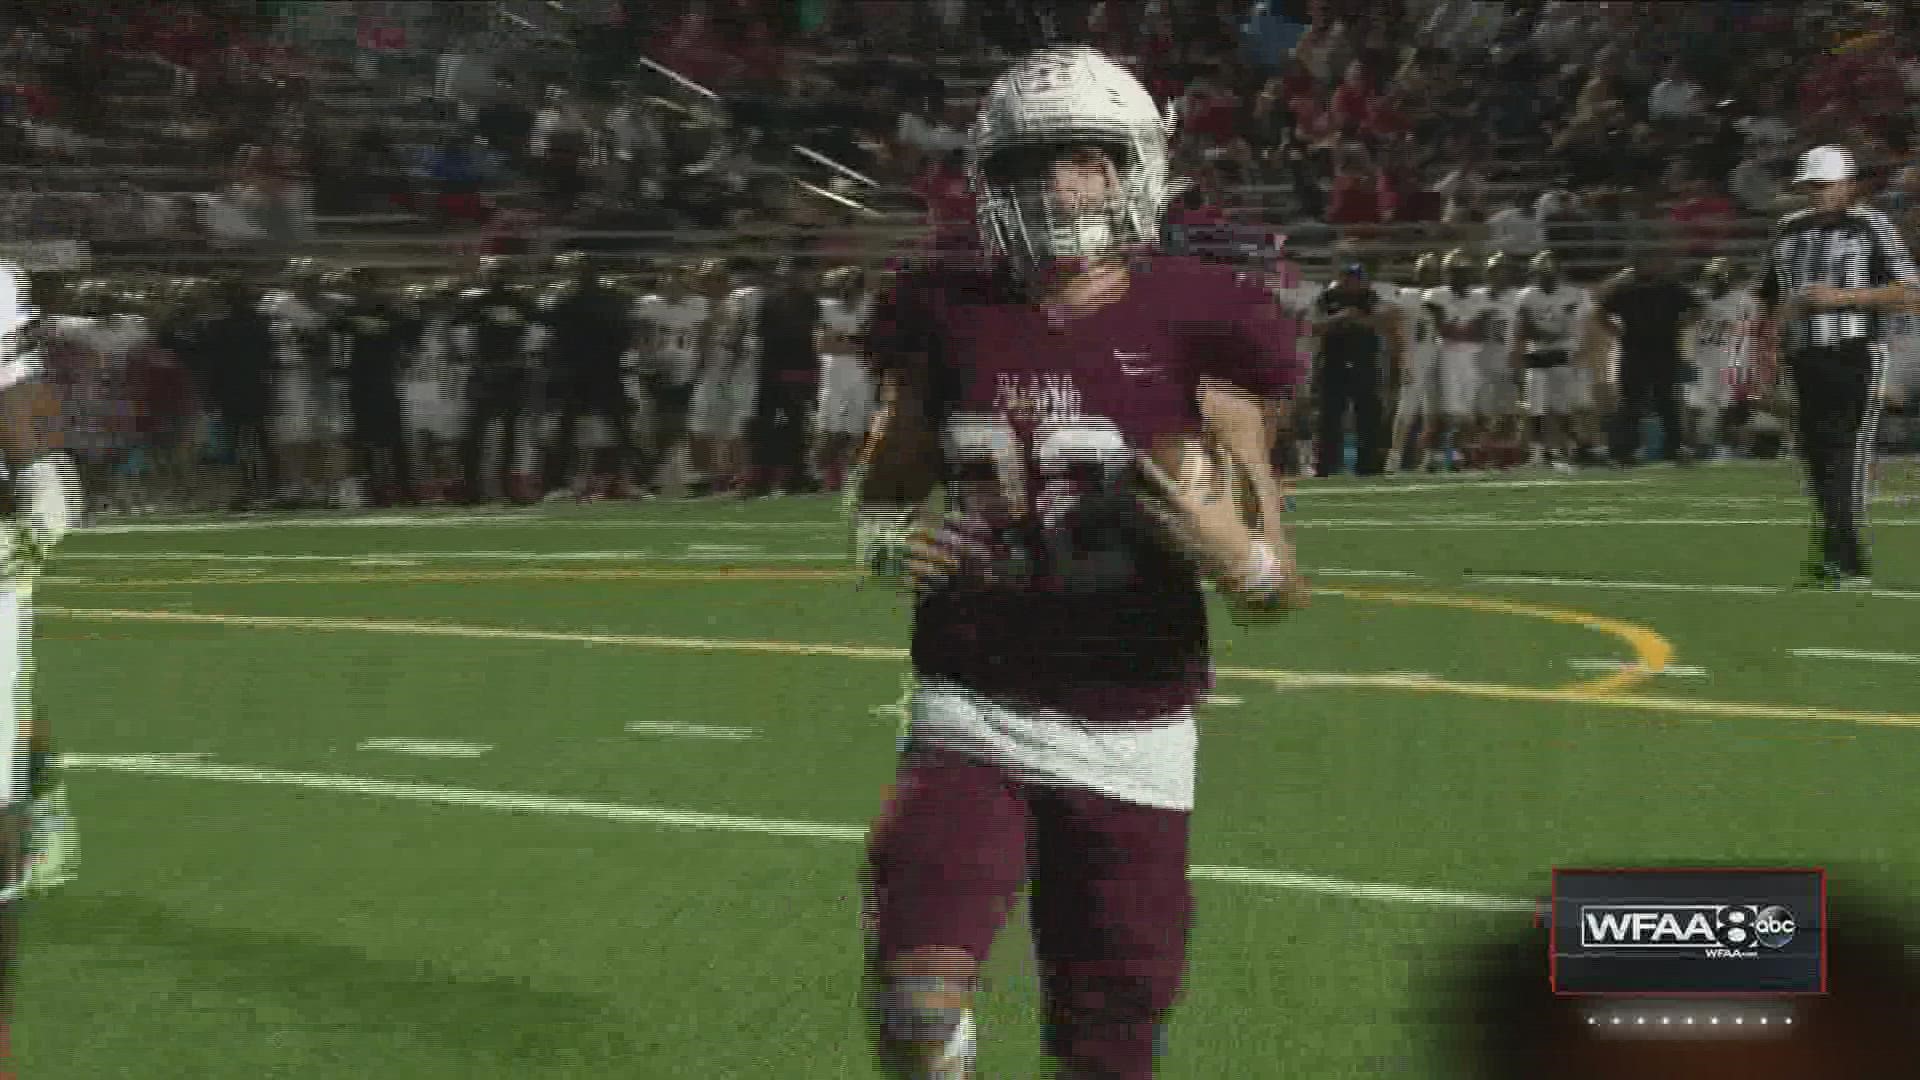 Plano QB Drew Forkner and his four touchdowns led the Wildcats to victory in their district opener against the Panthers.